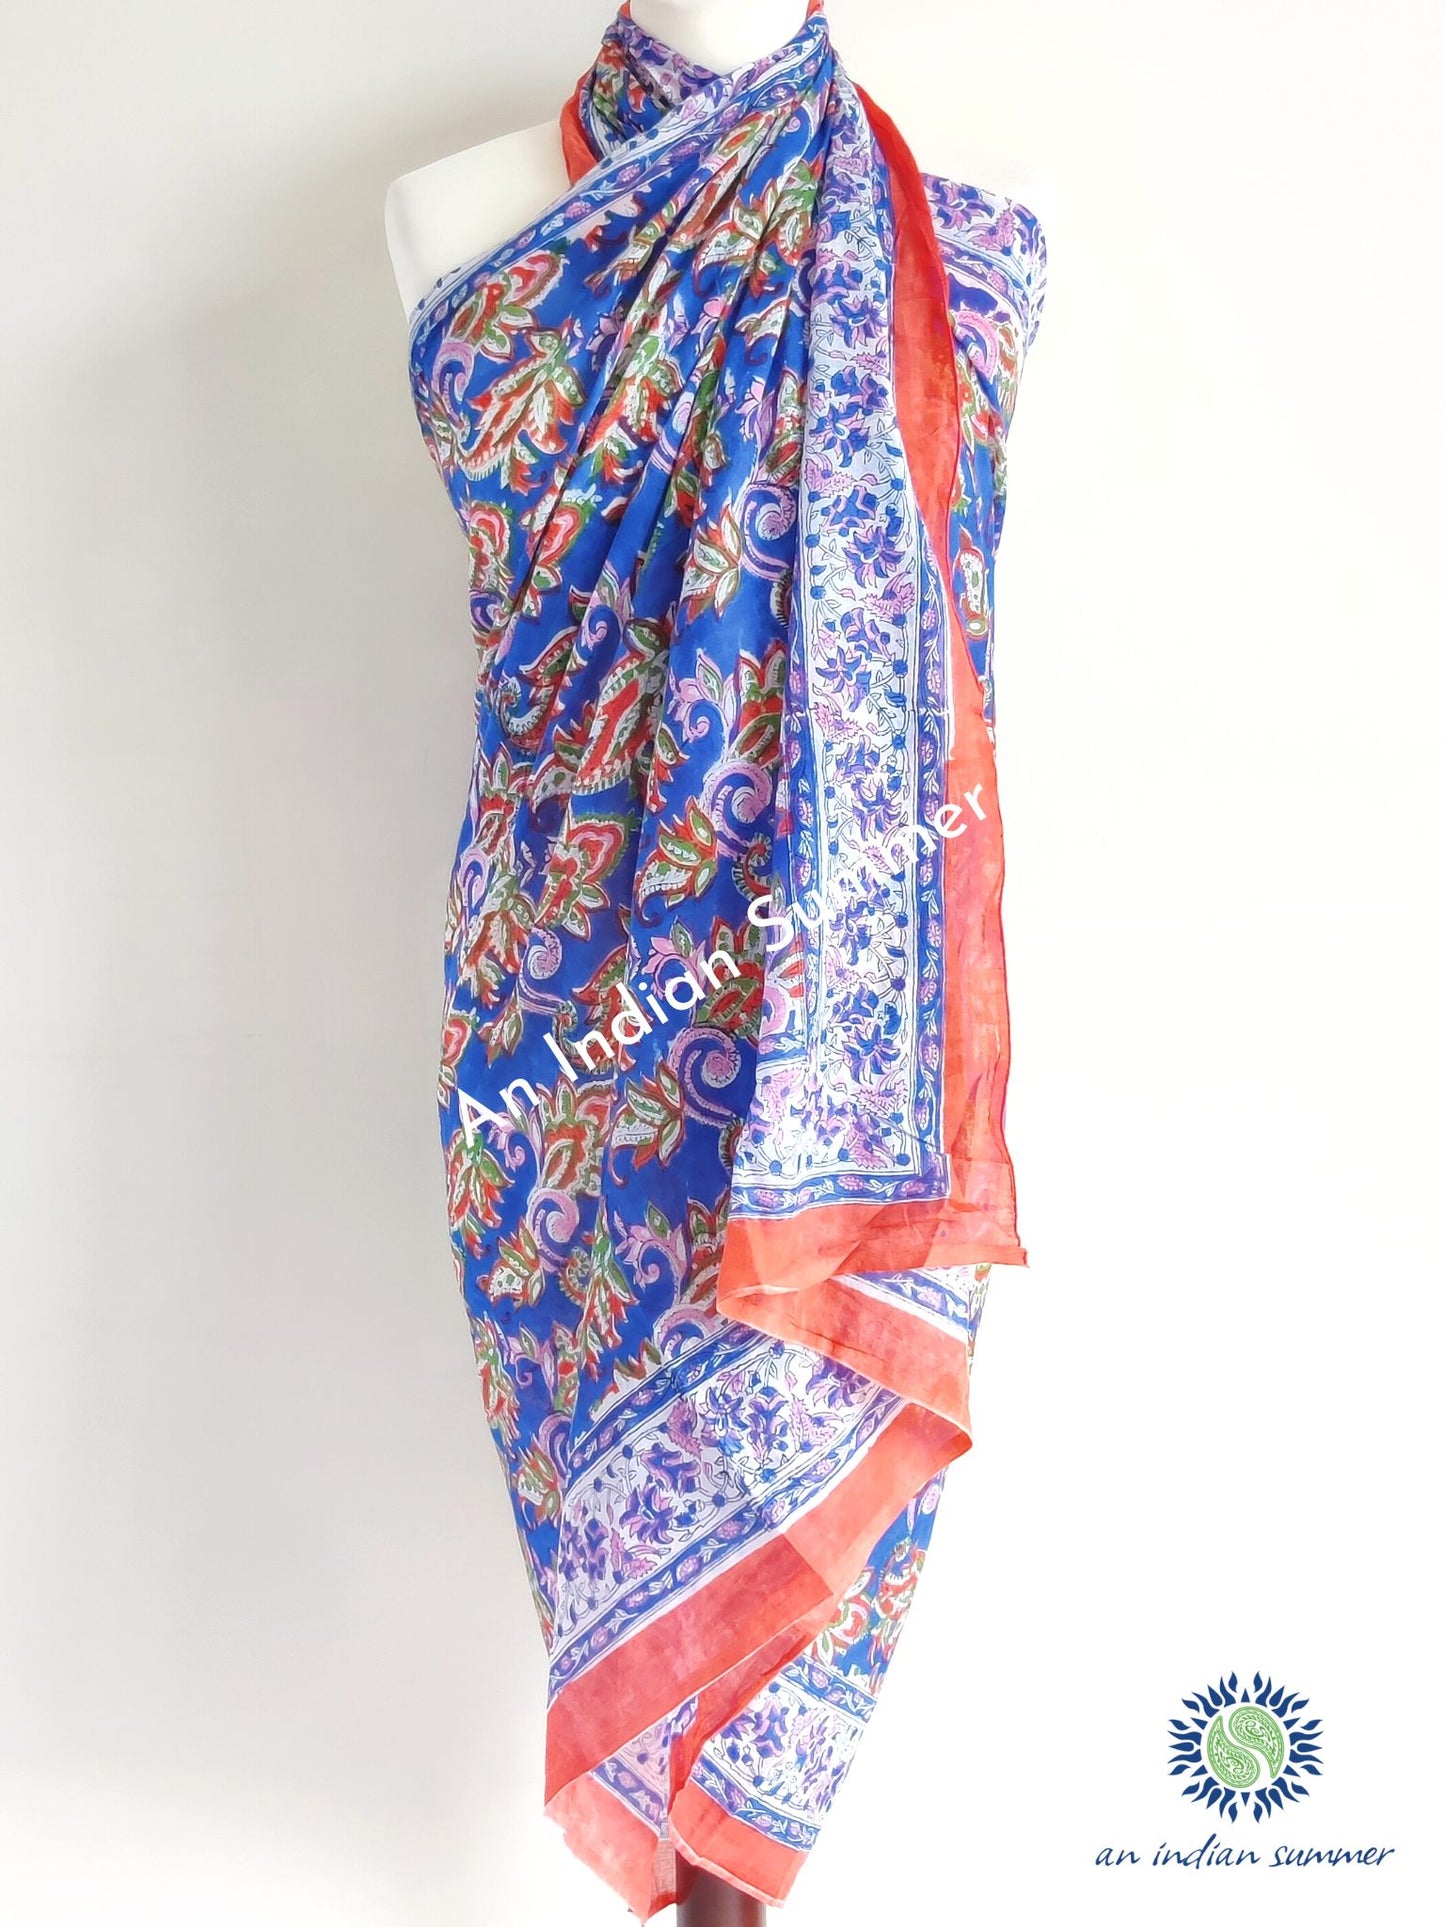 Anuradha Sarong Pareo | Blue Paisley Design | Hand Block Printed | Soft Cotton Voile | An Indian Summer | Seasonless Timeless Sustainable Ethical Authentic Artisan Conscious Clothing Lifestyle Brand